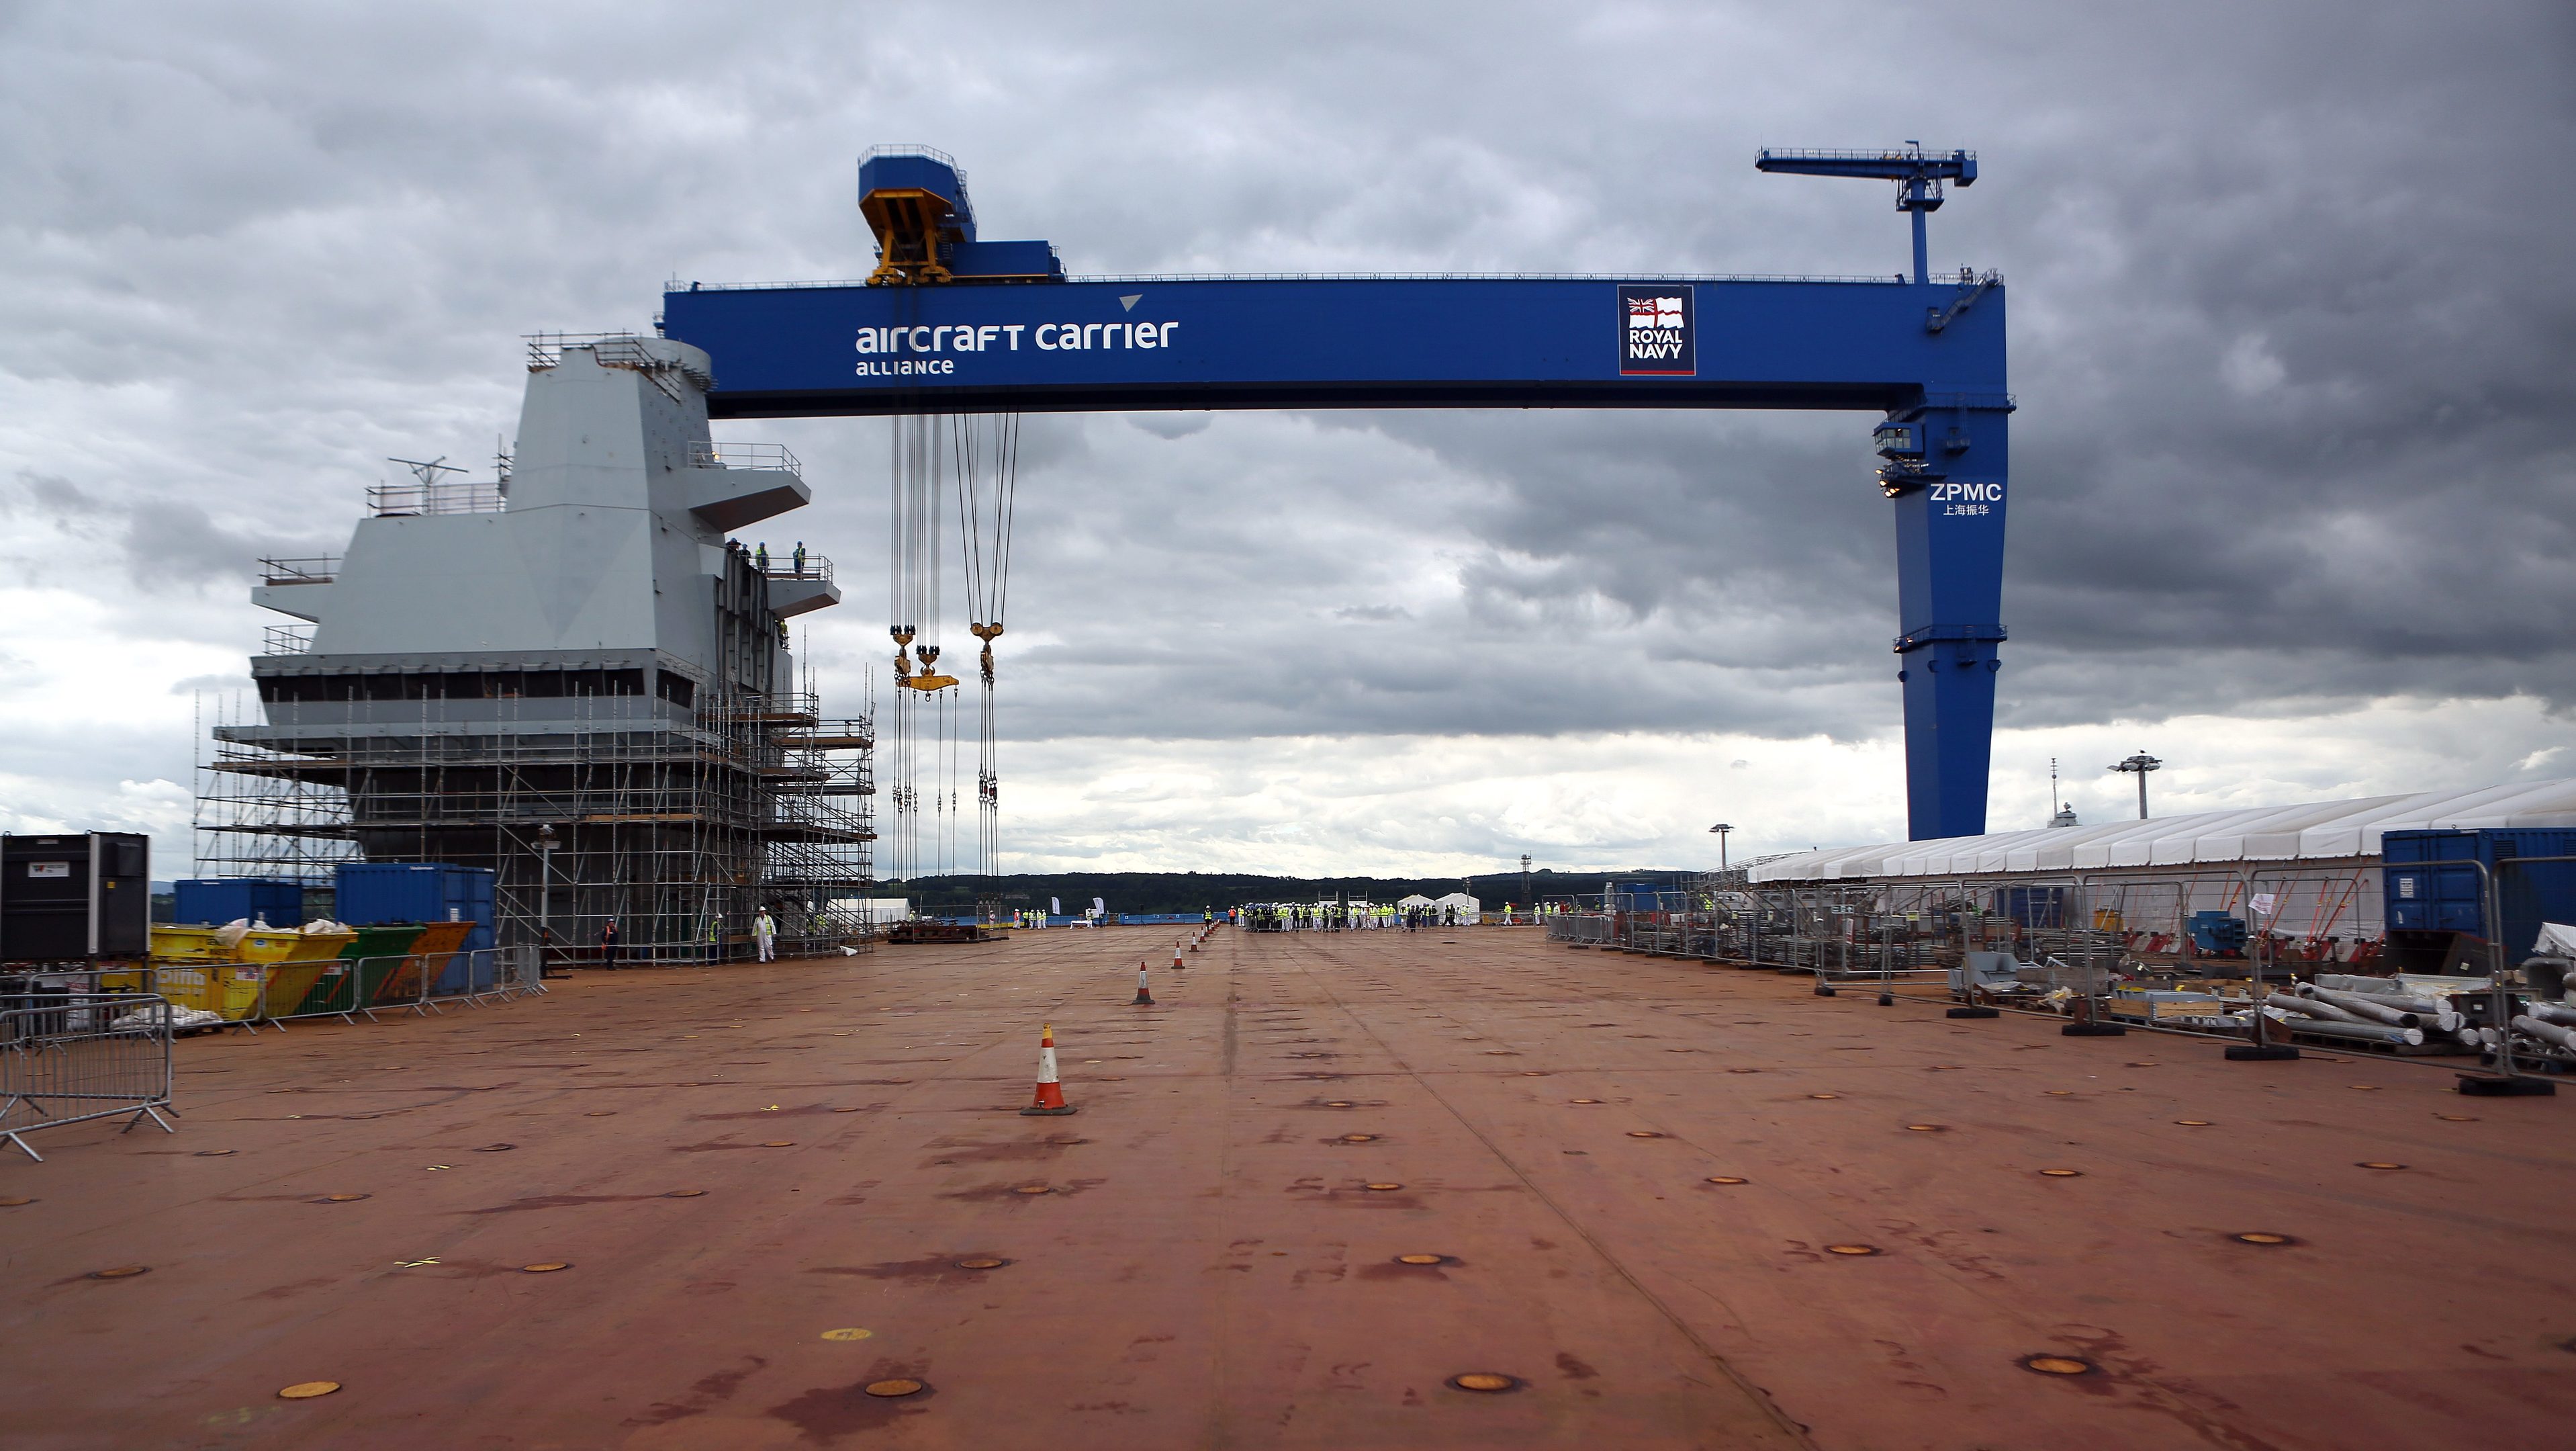 The deck of the aircraft carrier at Rosyth Dockyard.